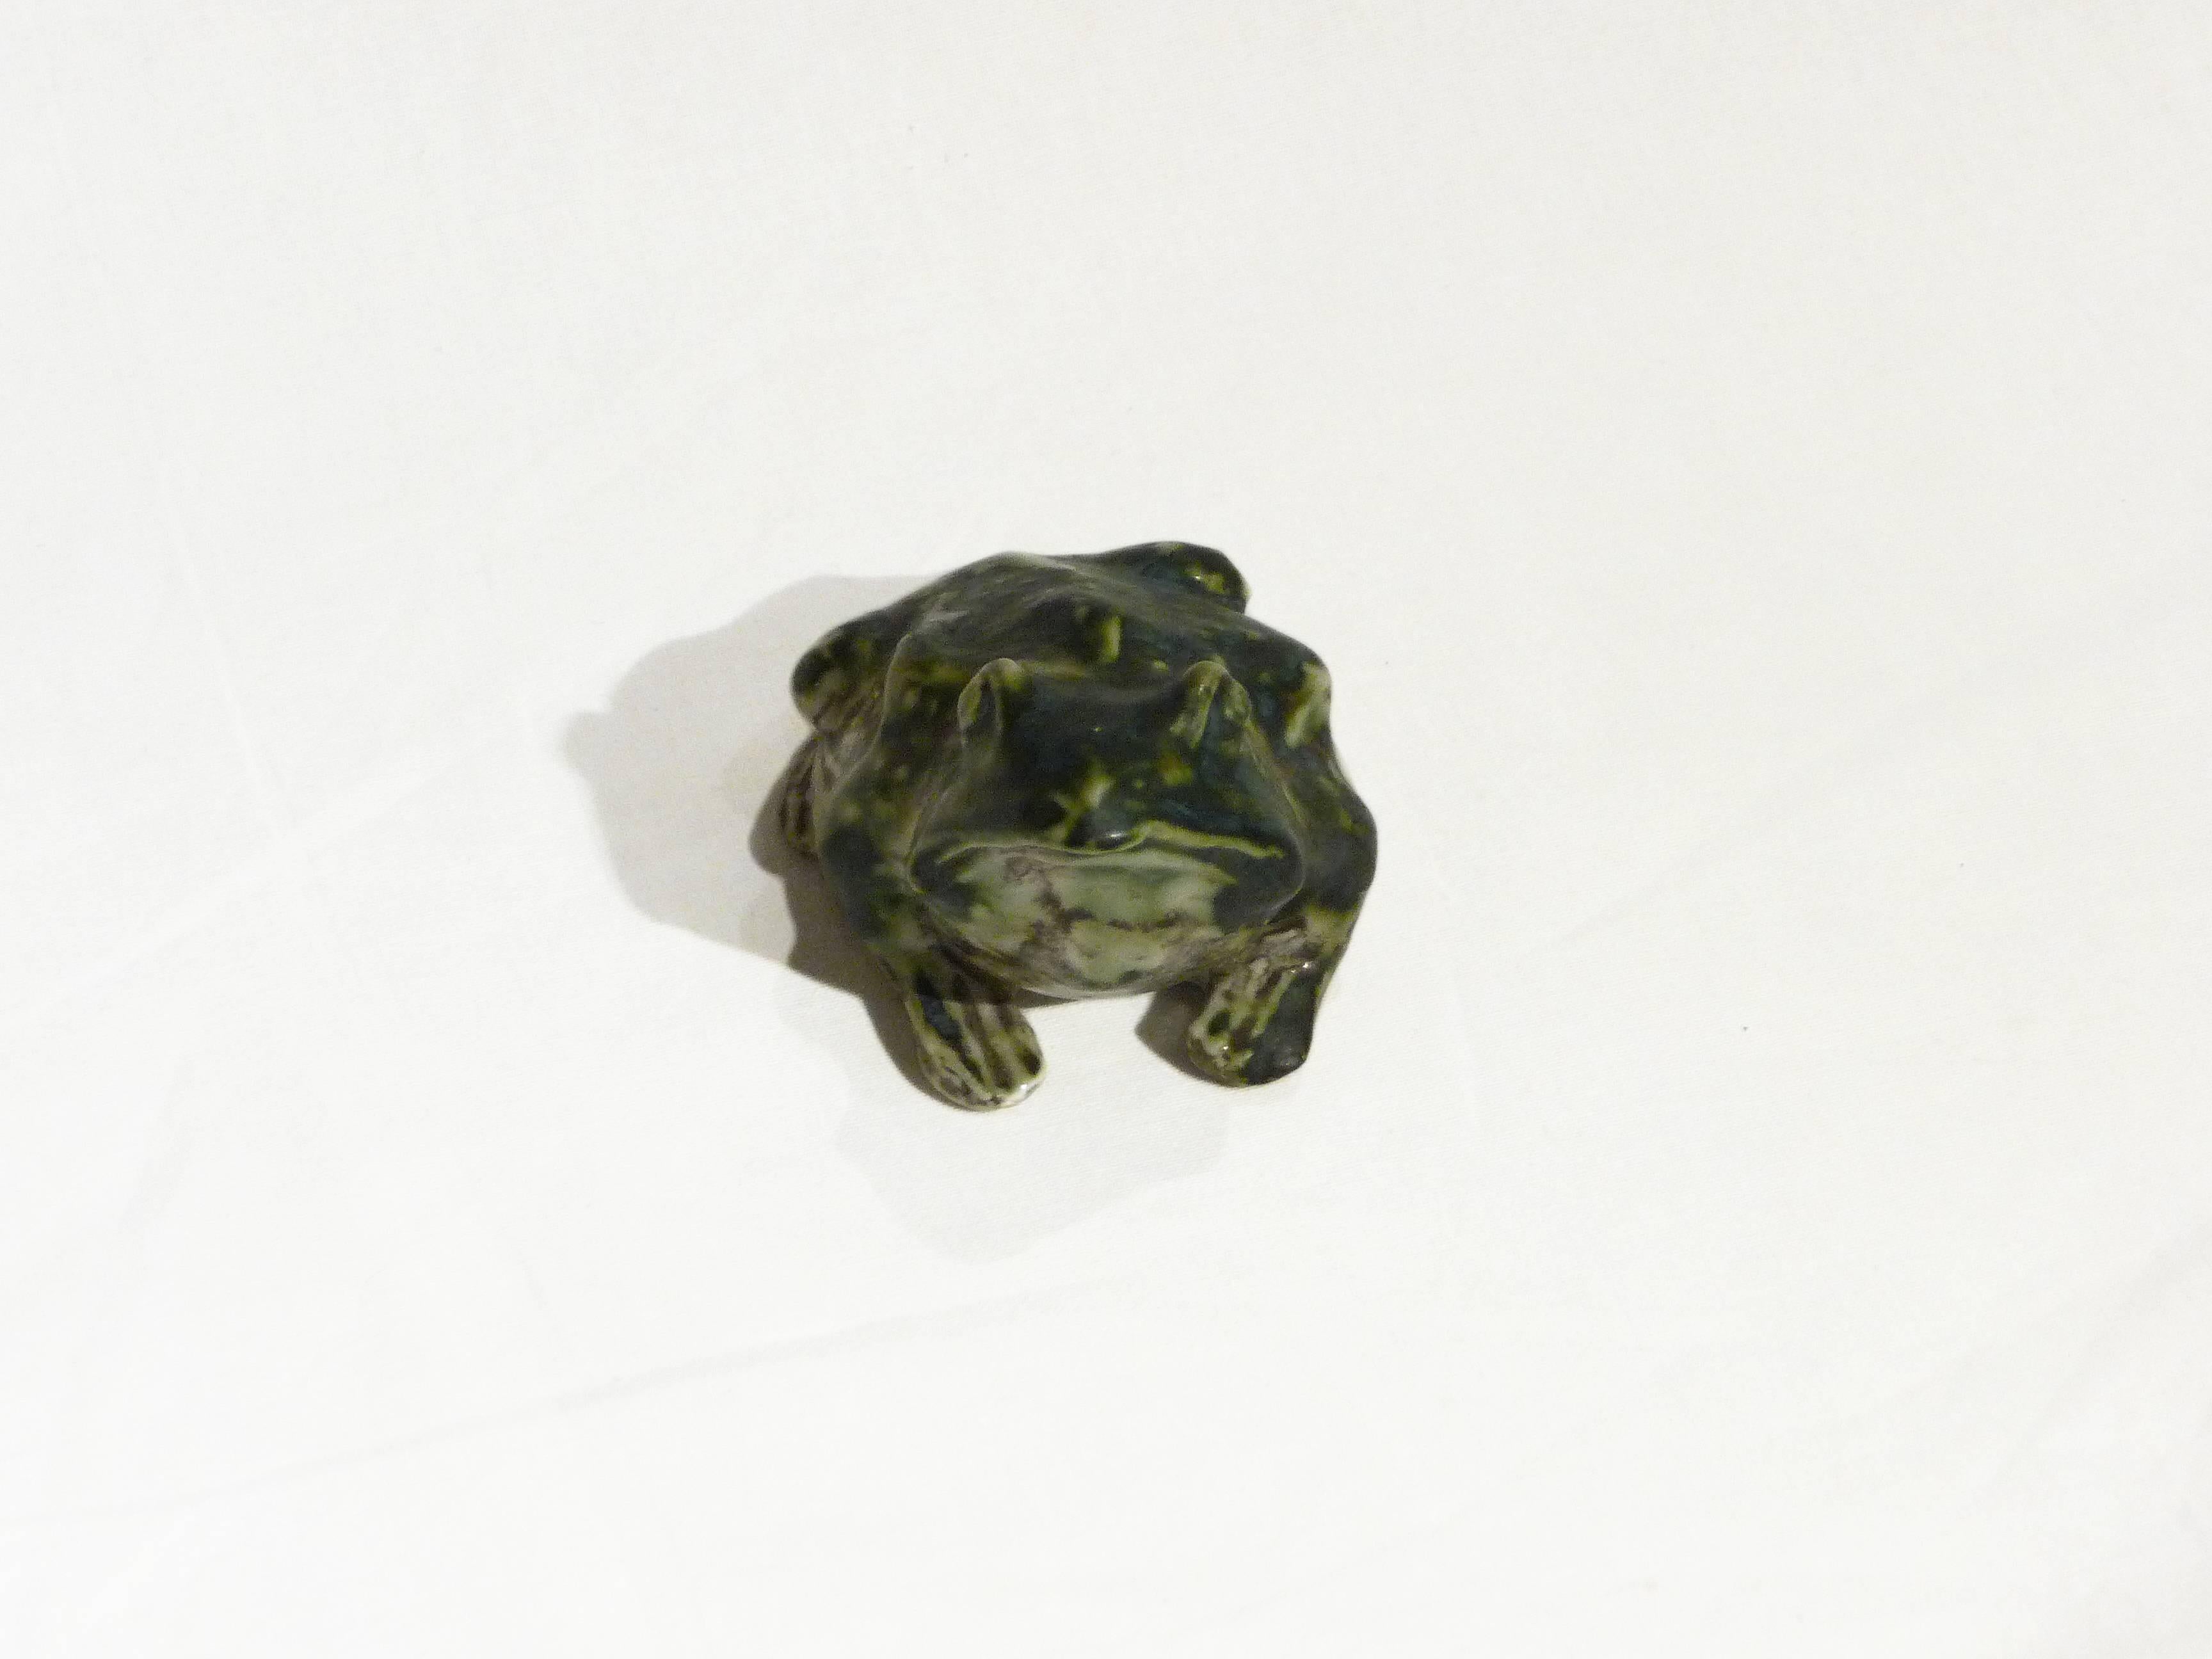 French Pierre-Adrien Dalpayrat, Sculpture Representing a Frog, Signed